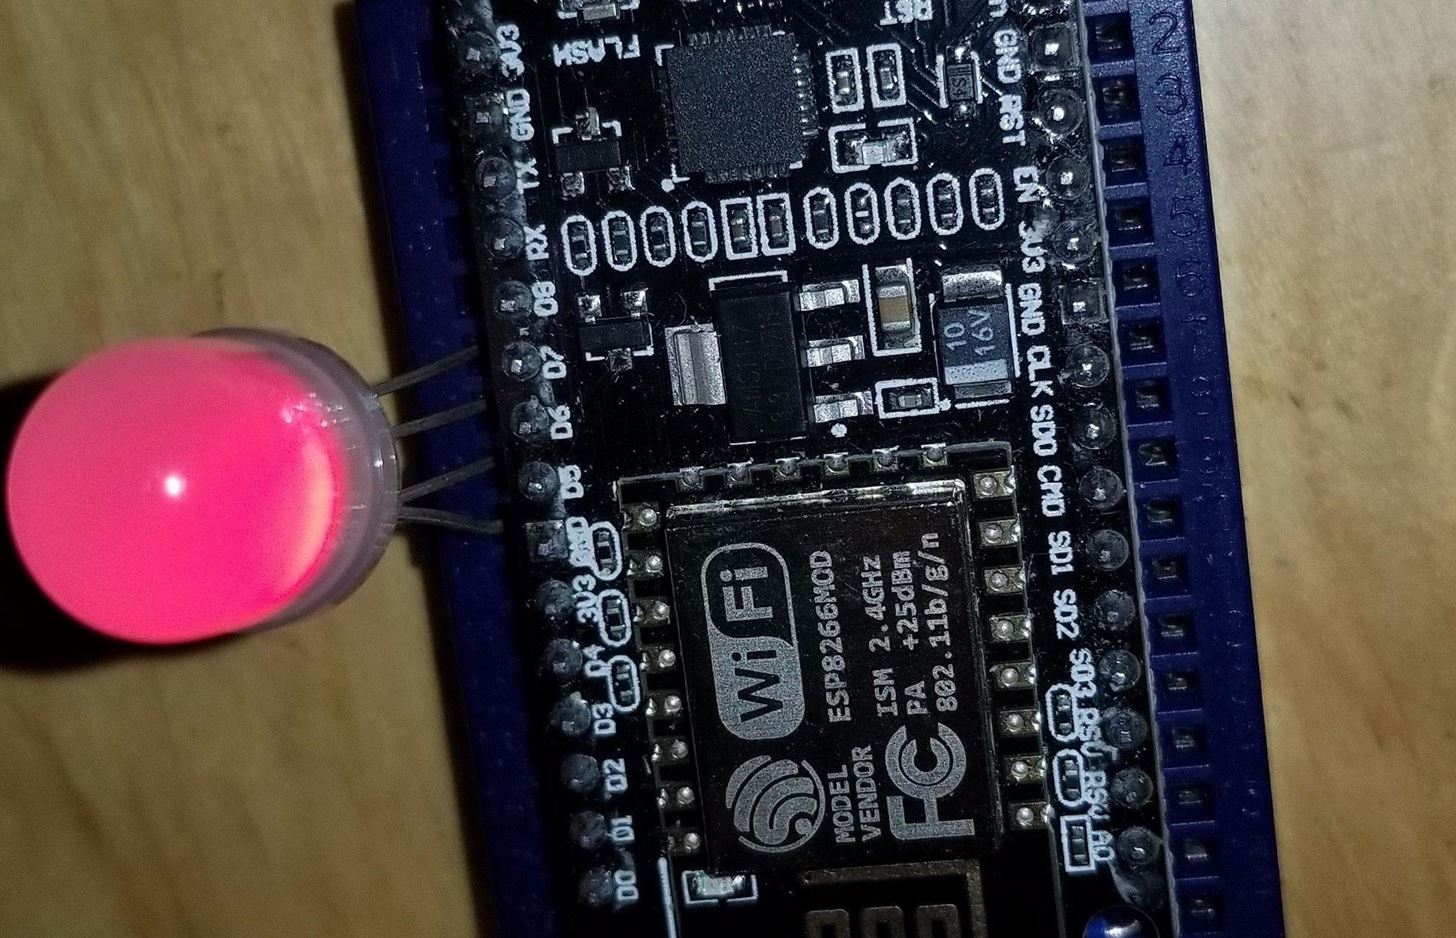 How to Detect & Classify Wi-Fi Jamming Packets with the NodeMCU